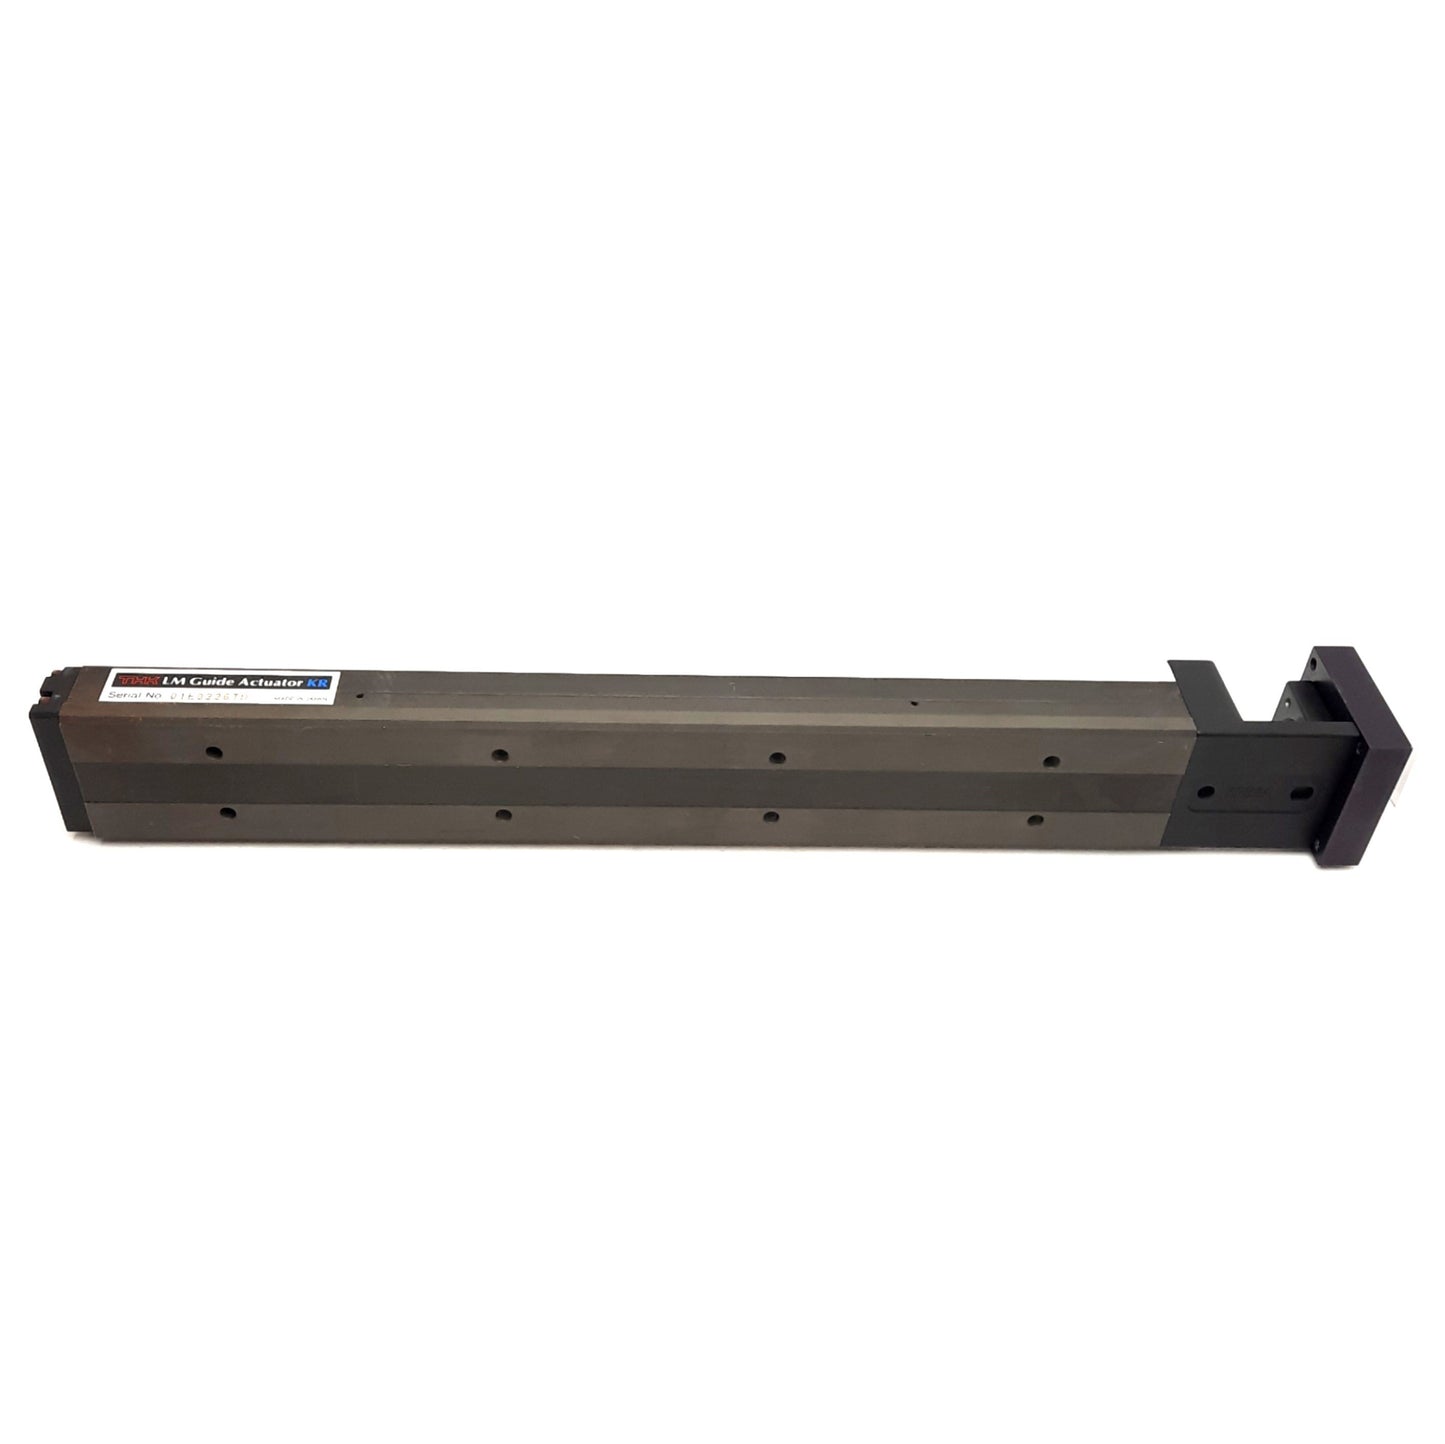 THK KR3310A-0300-000A0 LM Linear Positioner, 10mm Lead, 300mm Travel, NEMA 23